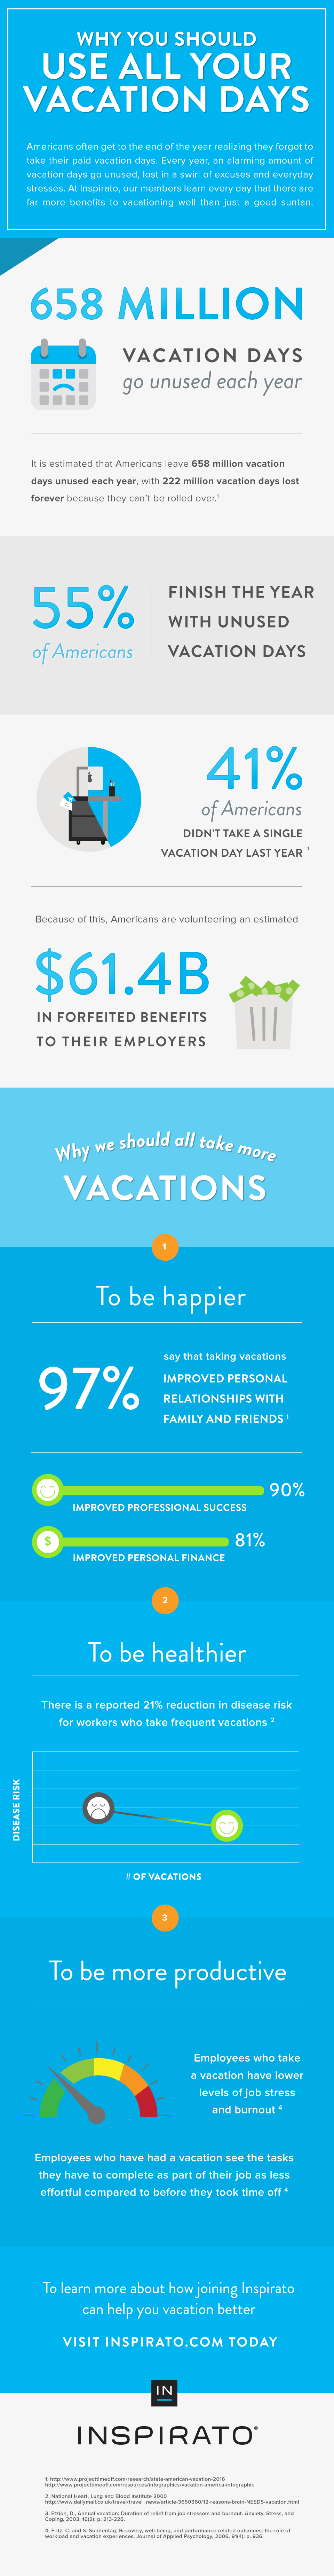 Vacation Days Infographic